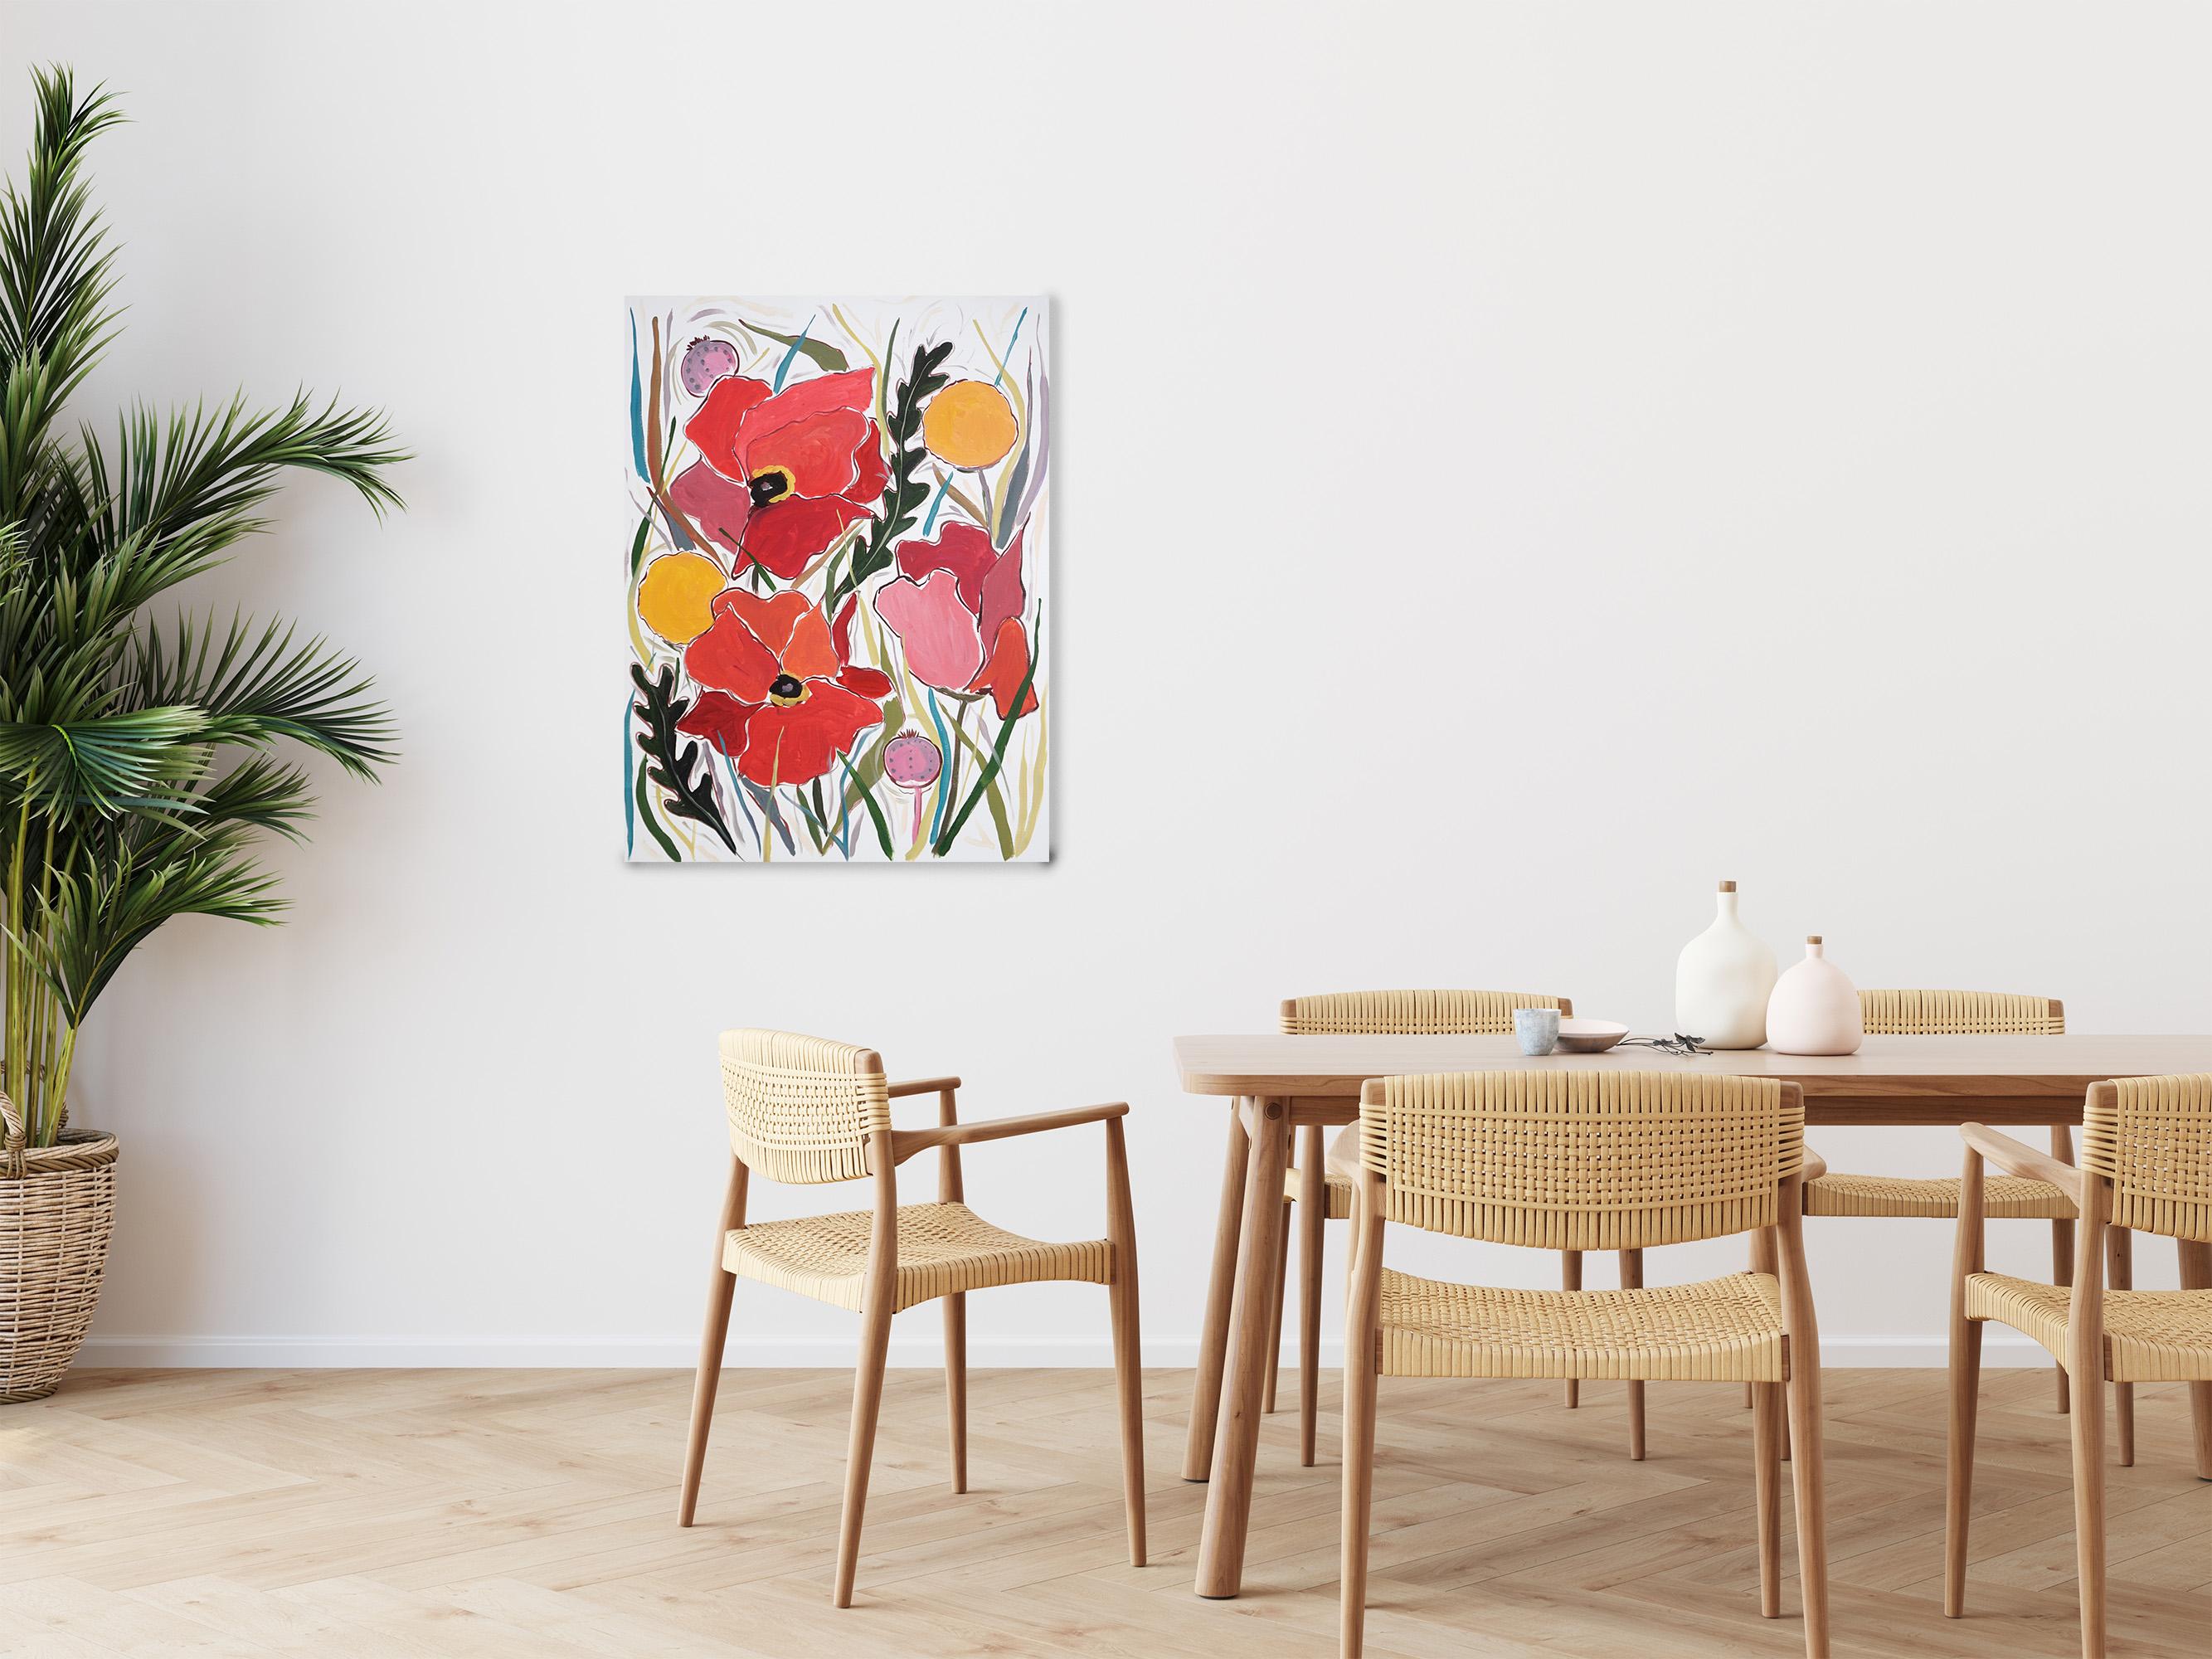 Red Giant Poppies and Yellow Craspedia Flowers on Canvas, Illustration Prairie For Sale 1